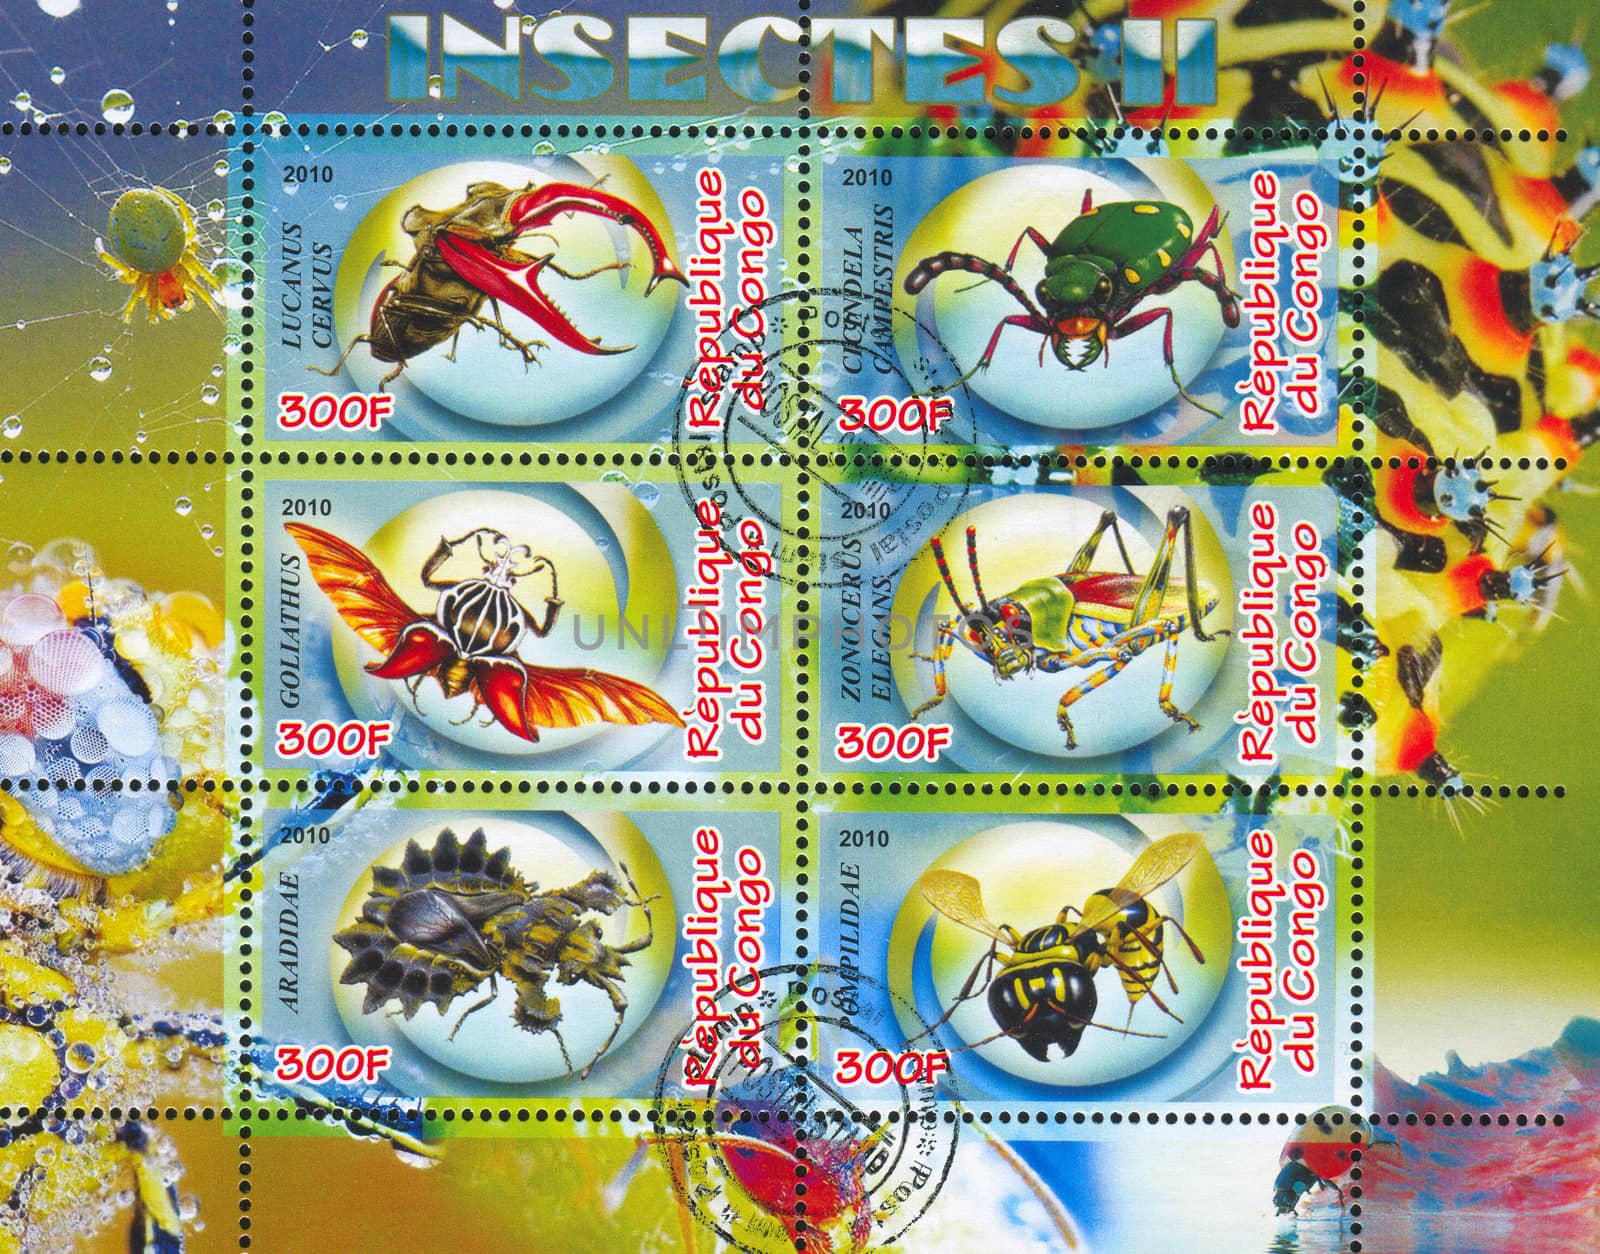 CONGO - CIRCA 2010: stamp printed by Congo, shows insects, circa 2010